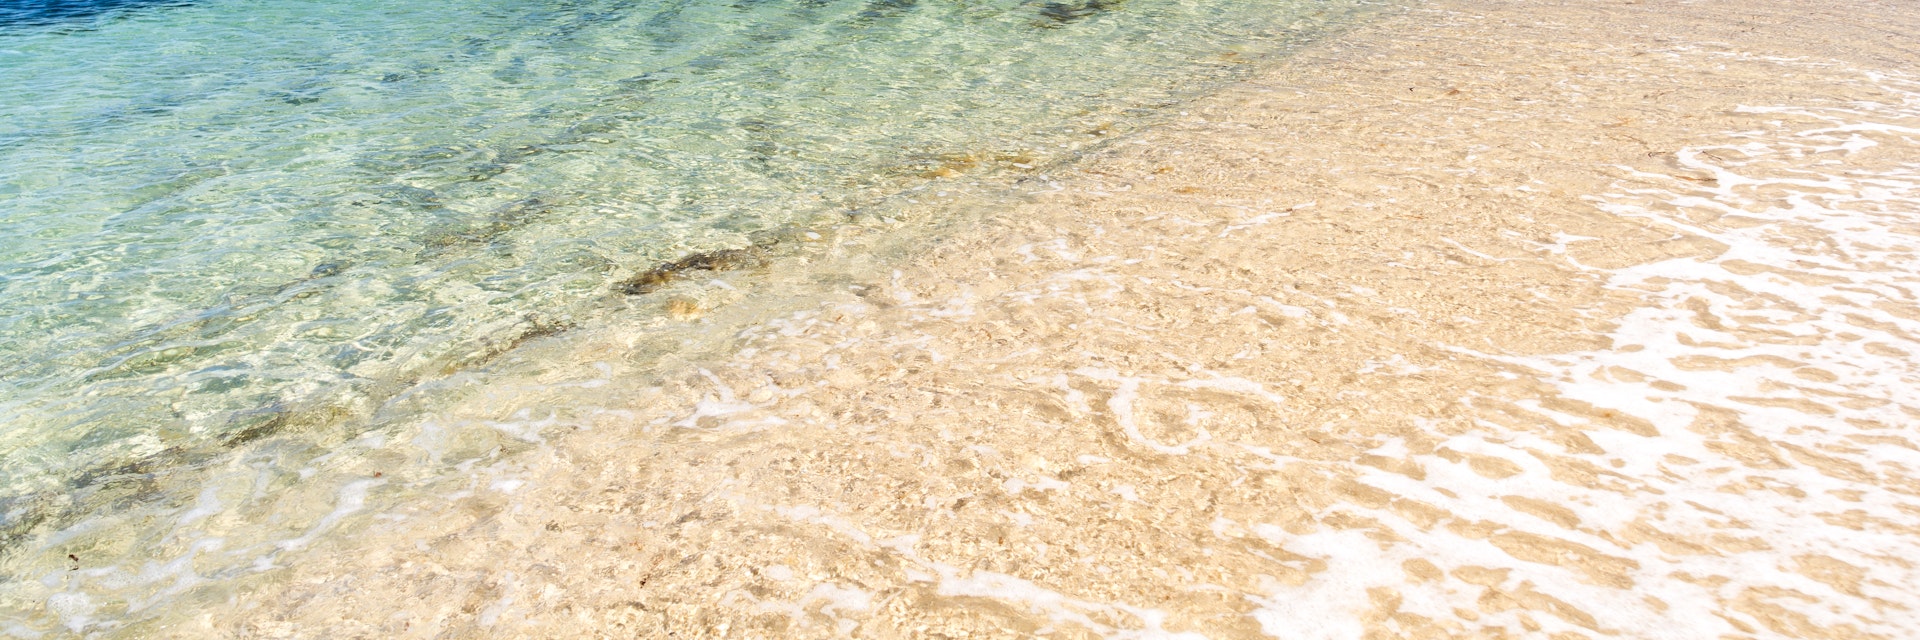 Crystal clear water on Pampelonne beach near Saint Tropez in south France.